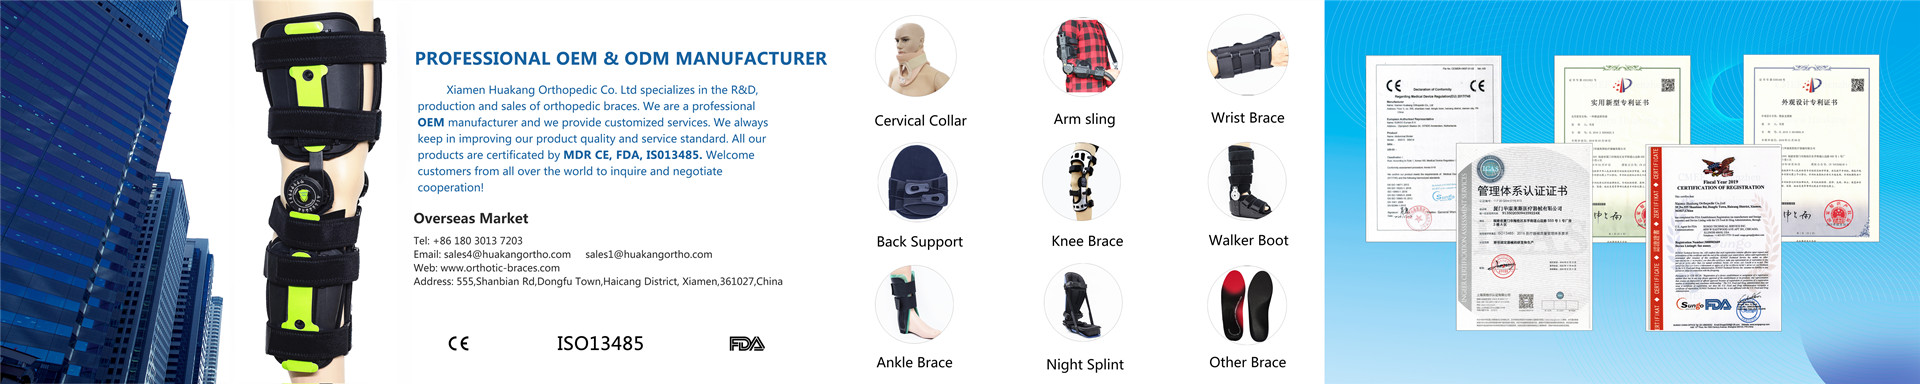 Custom Manufacturer of Orthopedic braces and supports